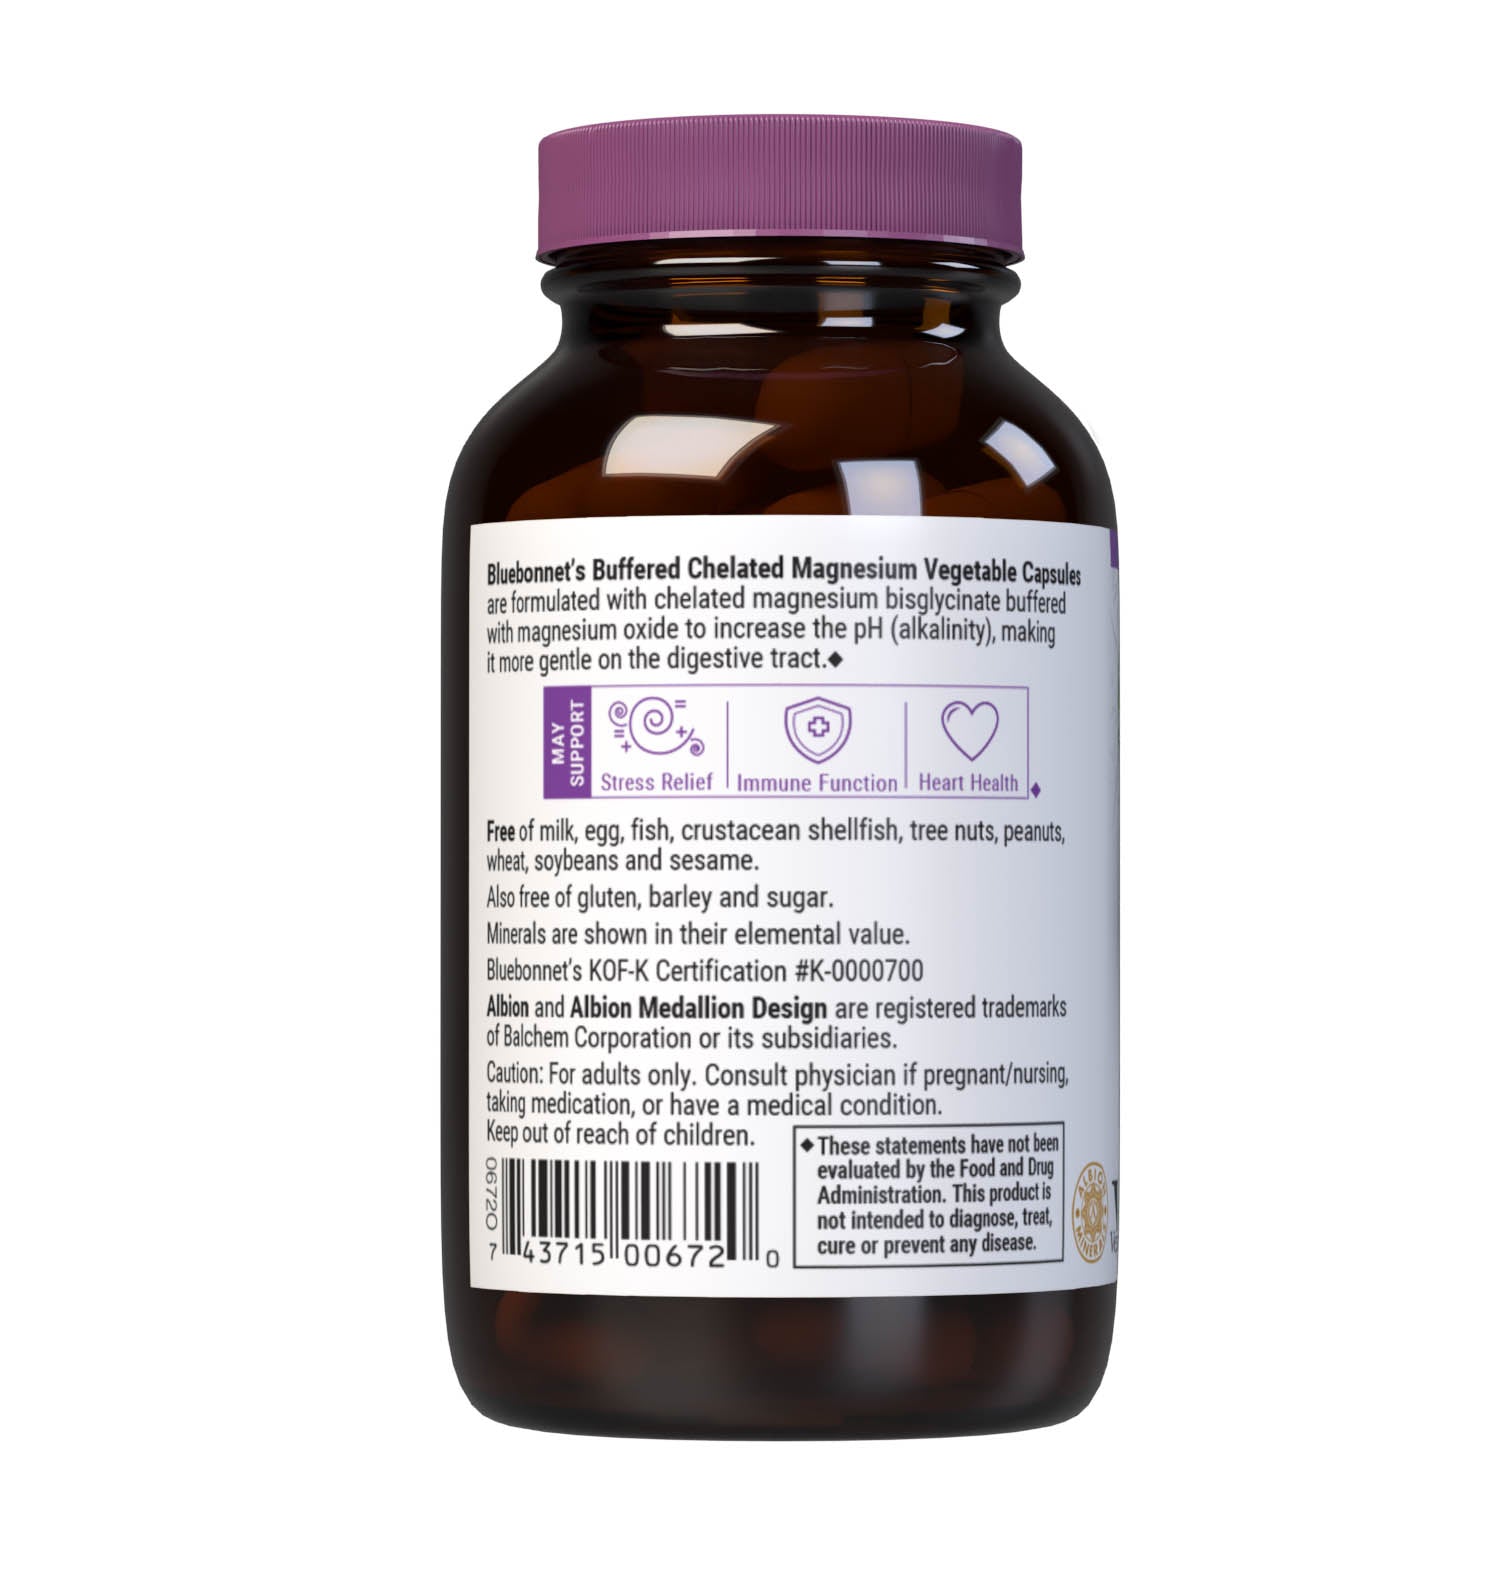 Bluebonnet's Buffered Chelated Magnesium 60 Vegetable Capsules are formulated with chelated magnesium bisglycinate buffered with magnesium oxide to increase the pH (alkalinity) to make it gentle on the digestive tract. Description panel. #size_60 count